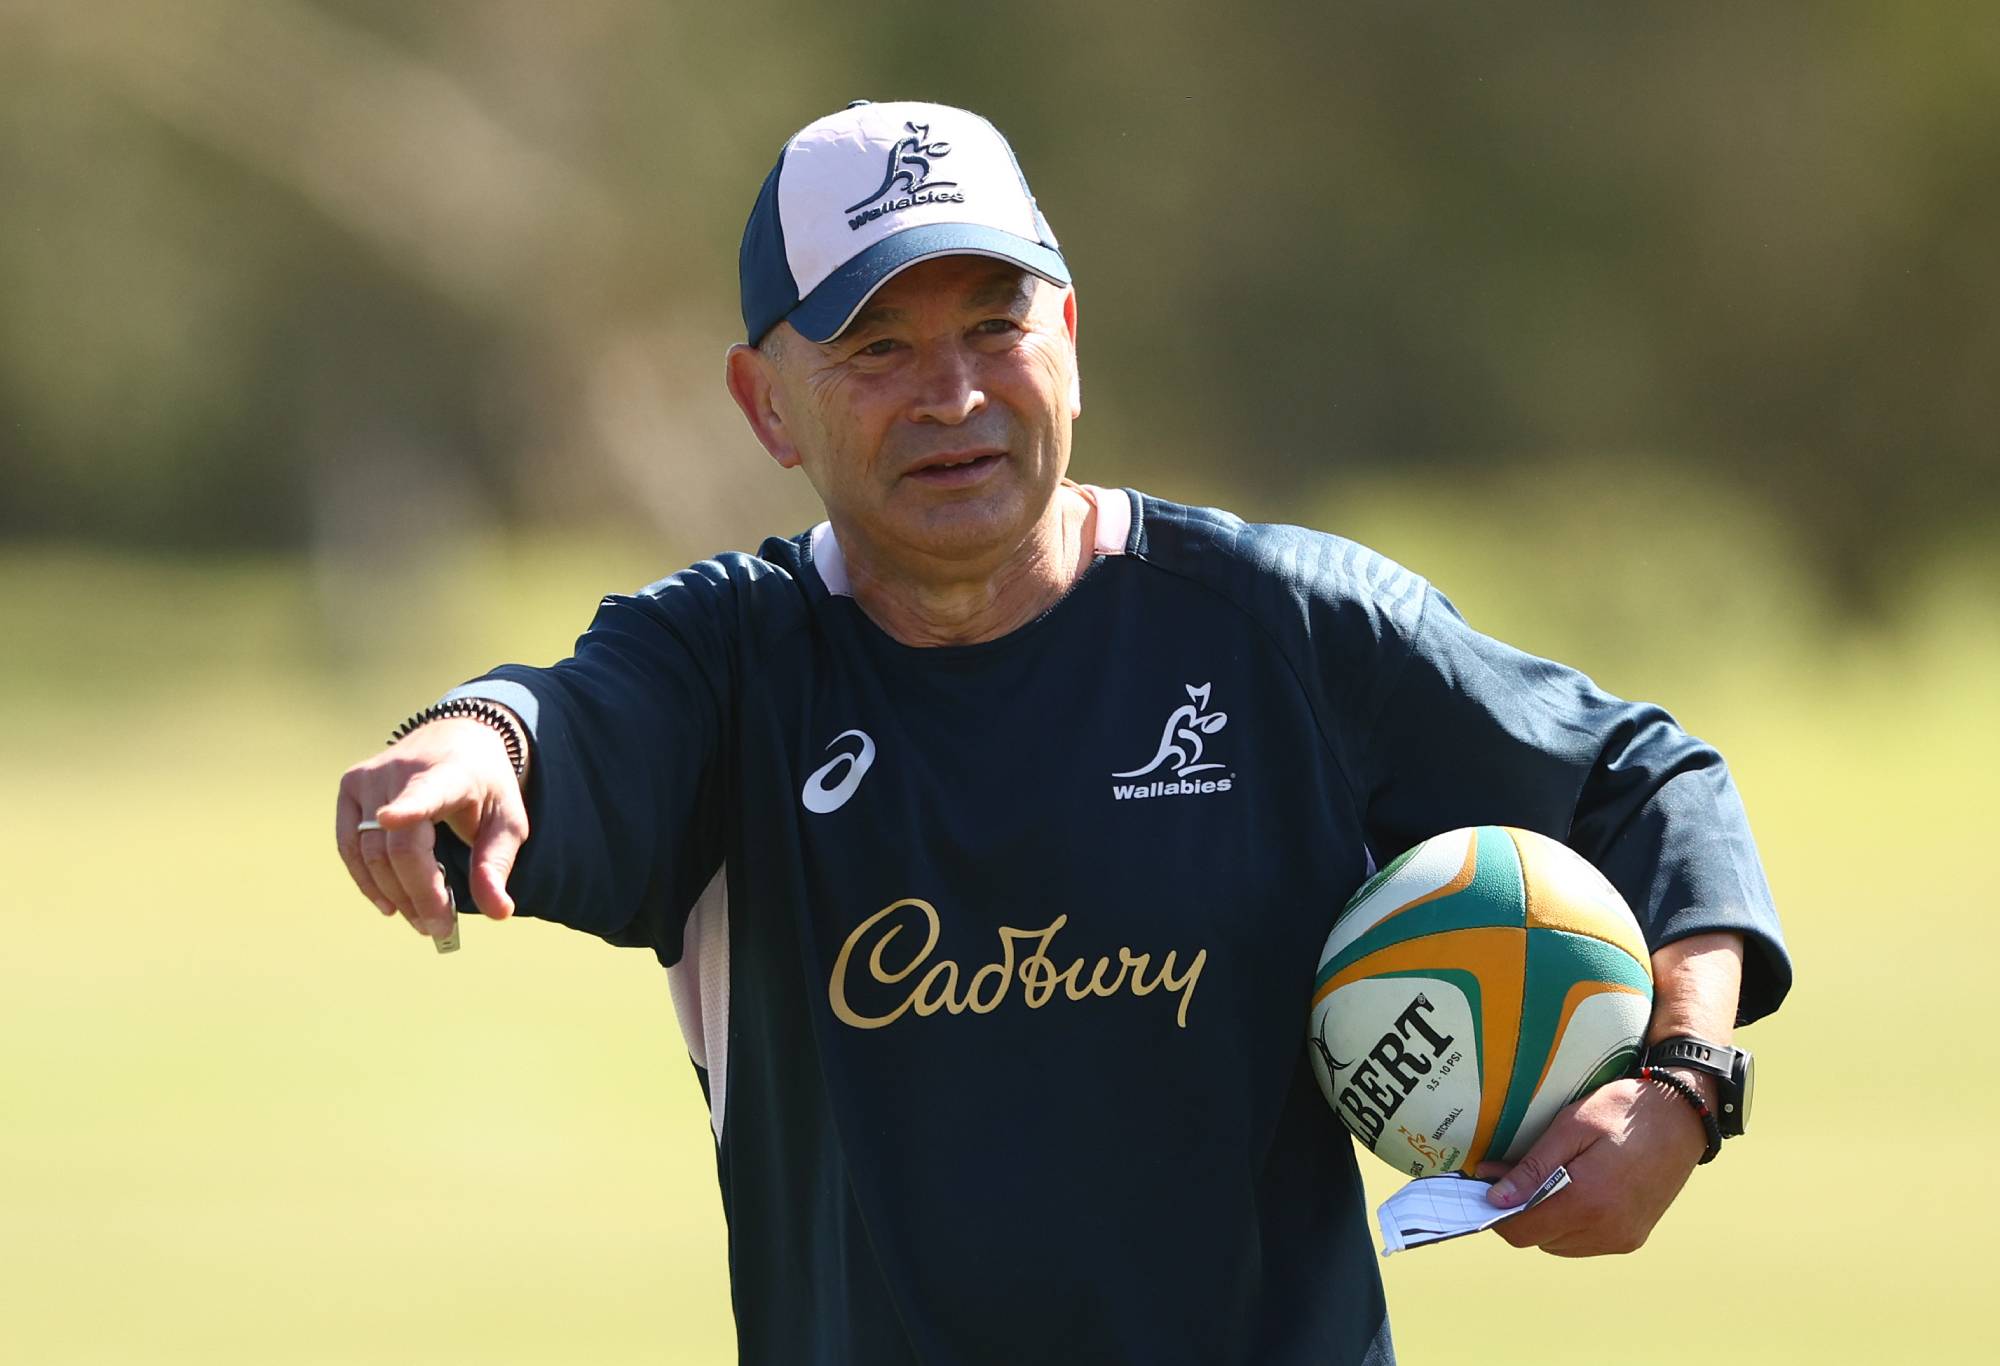 Revealed: Eddie's coaching team complete as Frenchman joins Wallabies ahead of World Cup